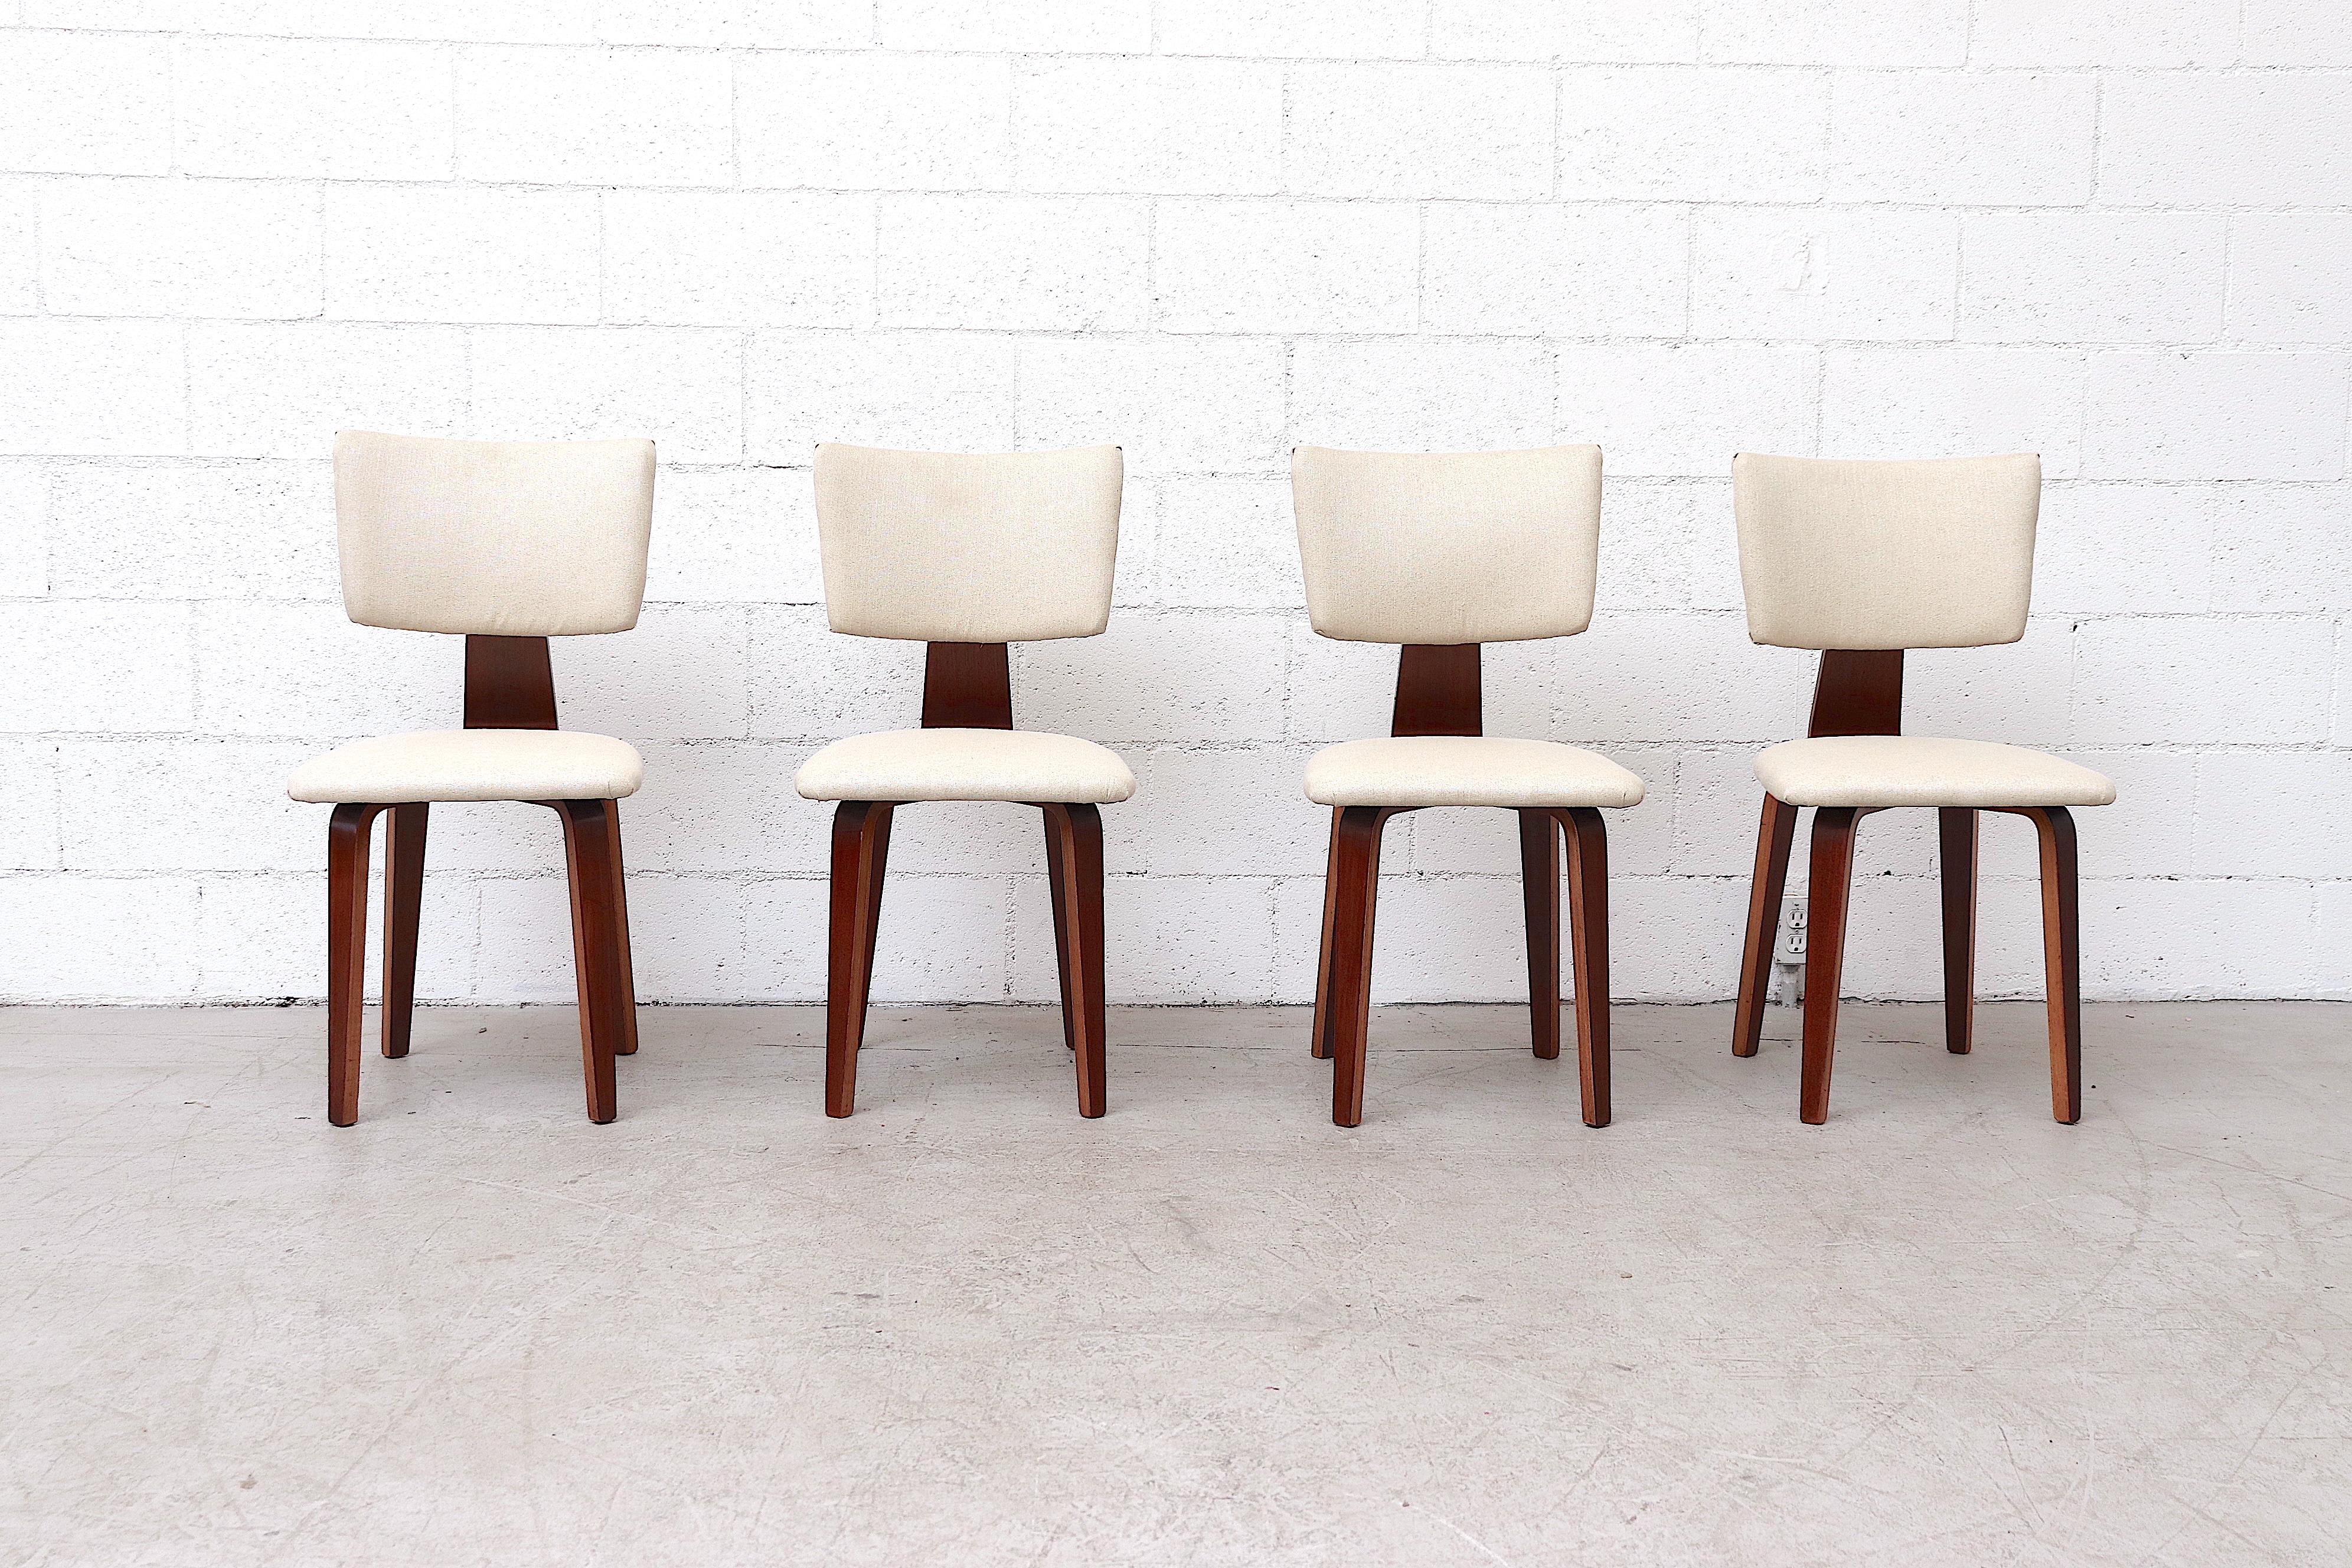 Beautiful set of 4 Cor Alons dining chairs with lightly refinished mahogany frames and freshly reupholstered white fabric seats. In original condition with some wear consistent with age and use. Set price.